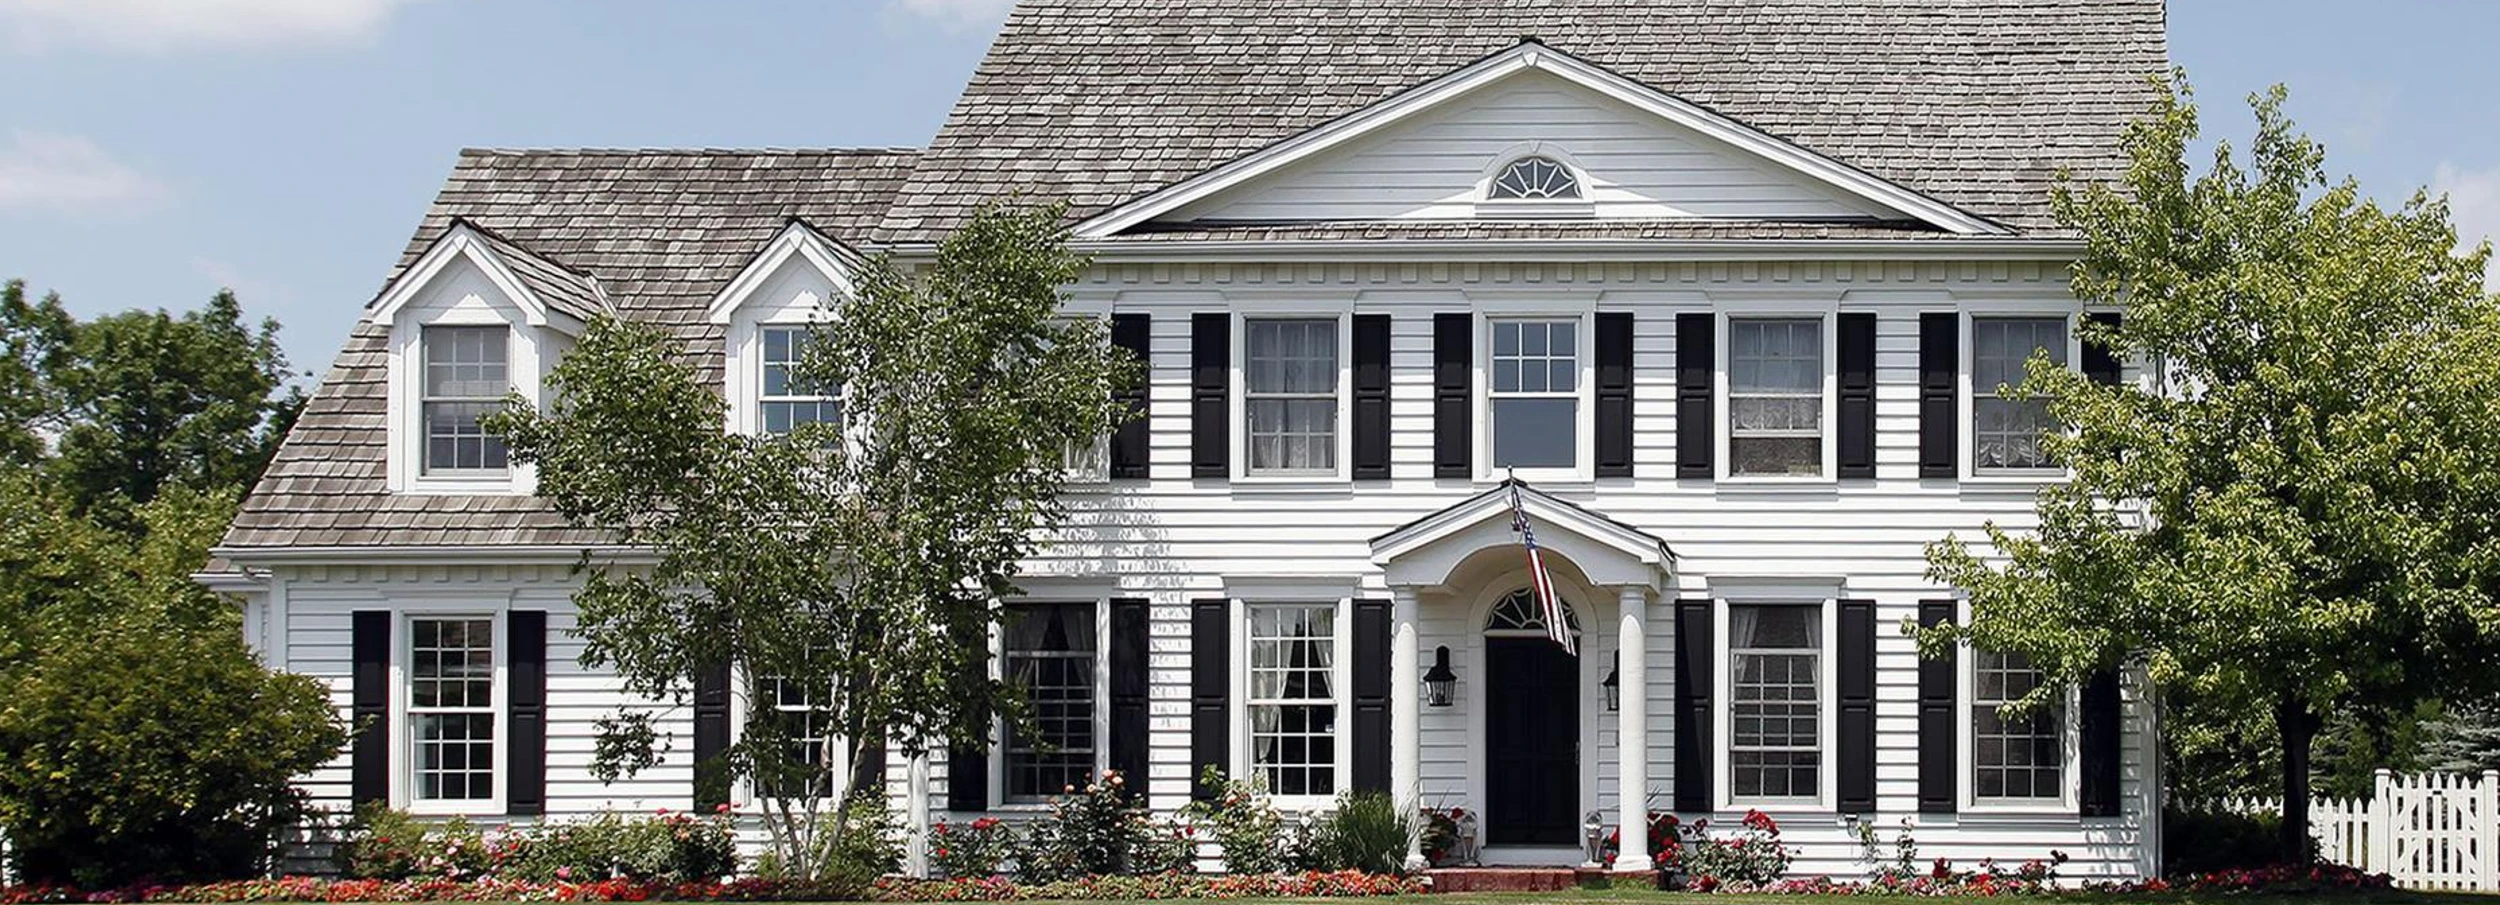 Exterior of a large white house with black shutters.